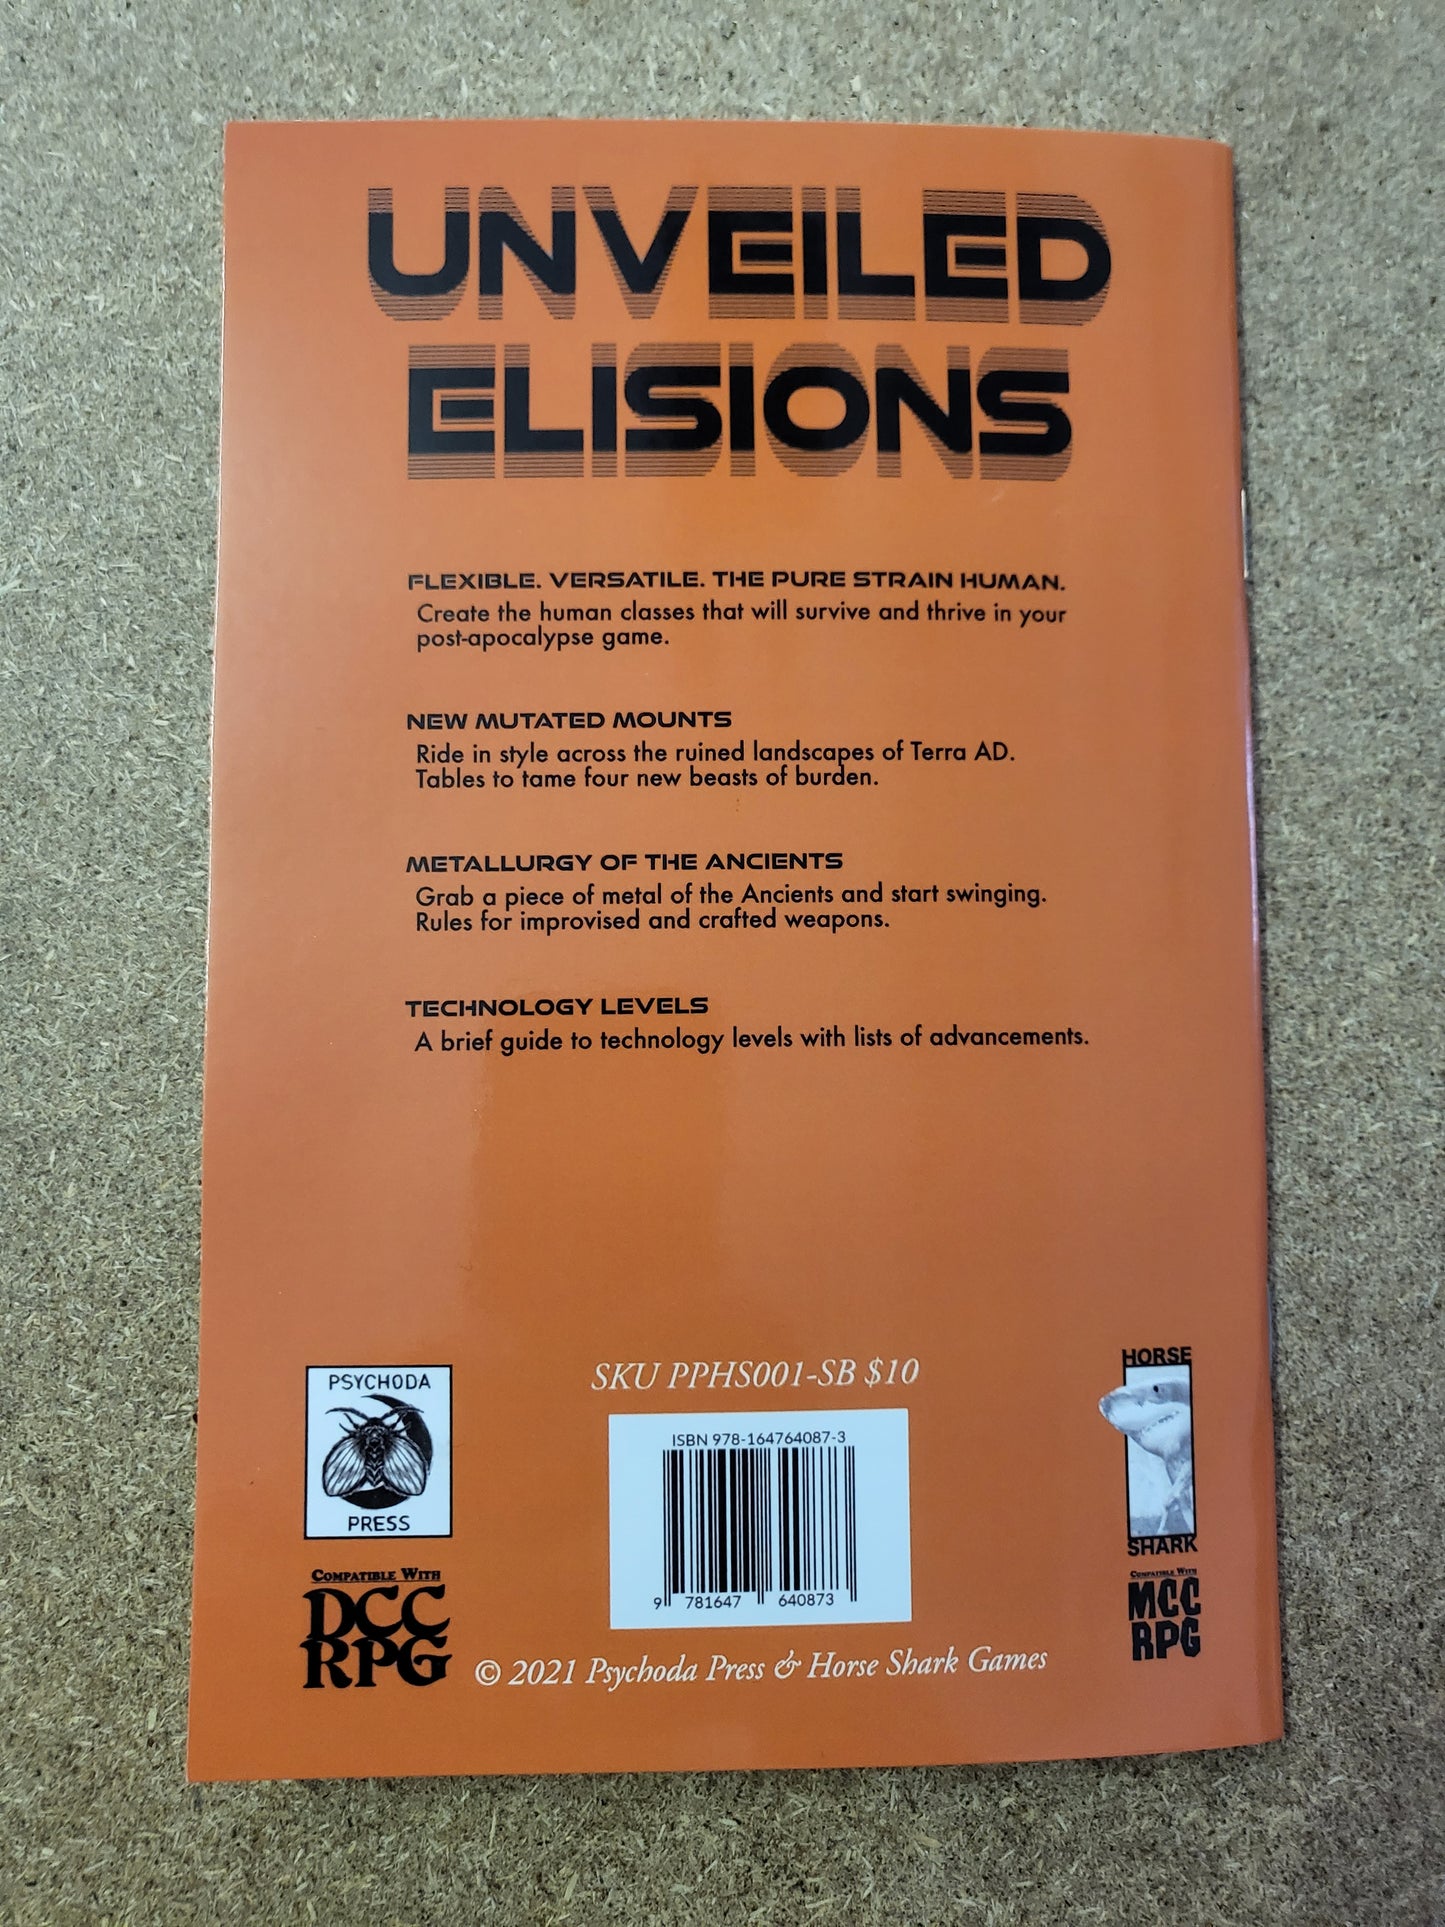 Unveiled Elisions #1